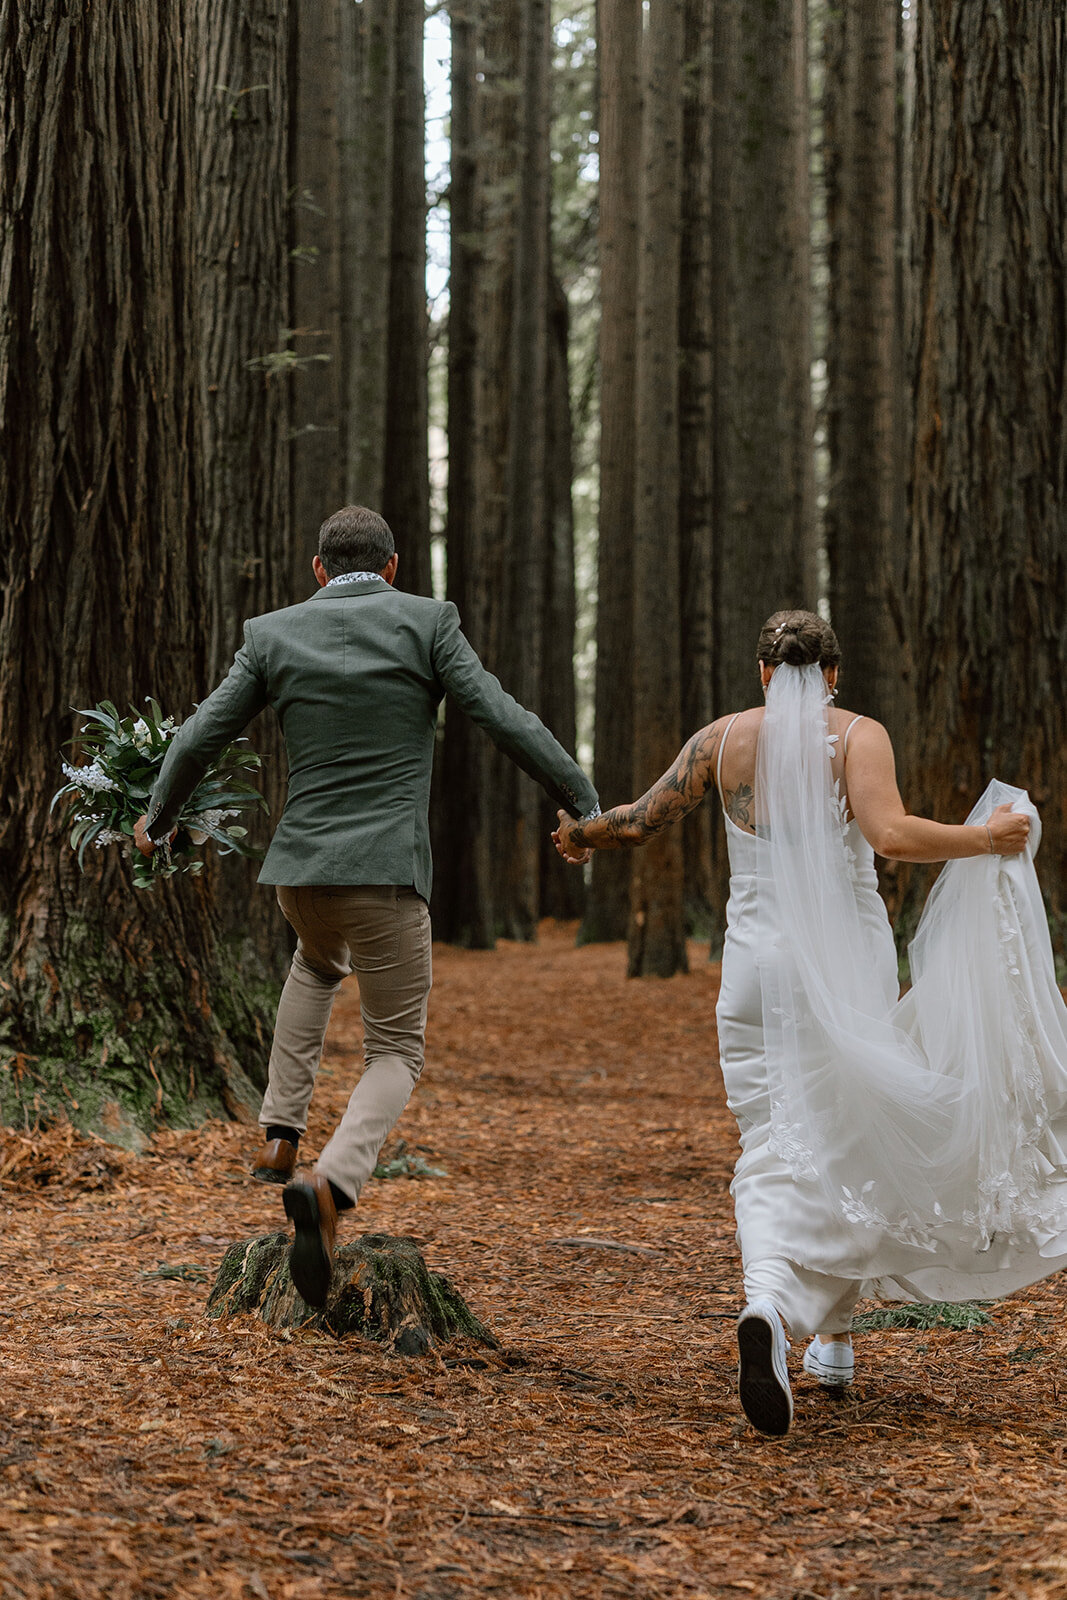 Stacey&Cory-Coast&Pines-373